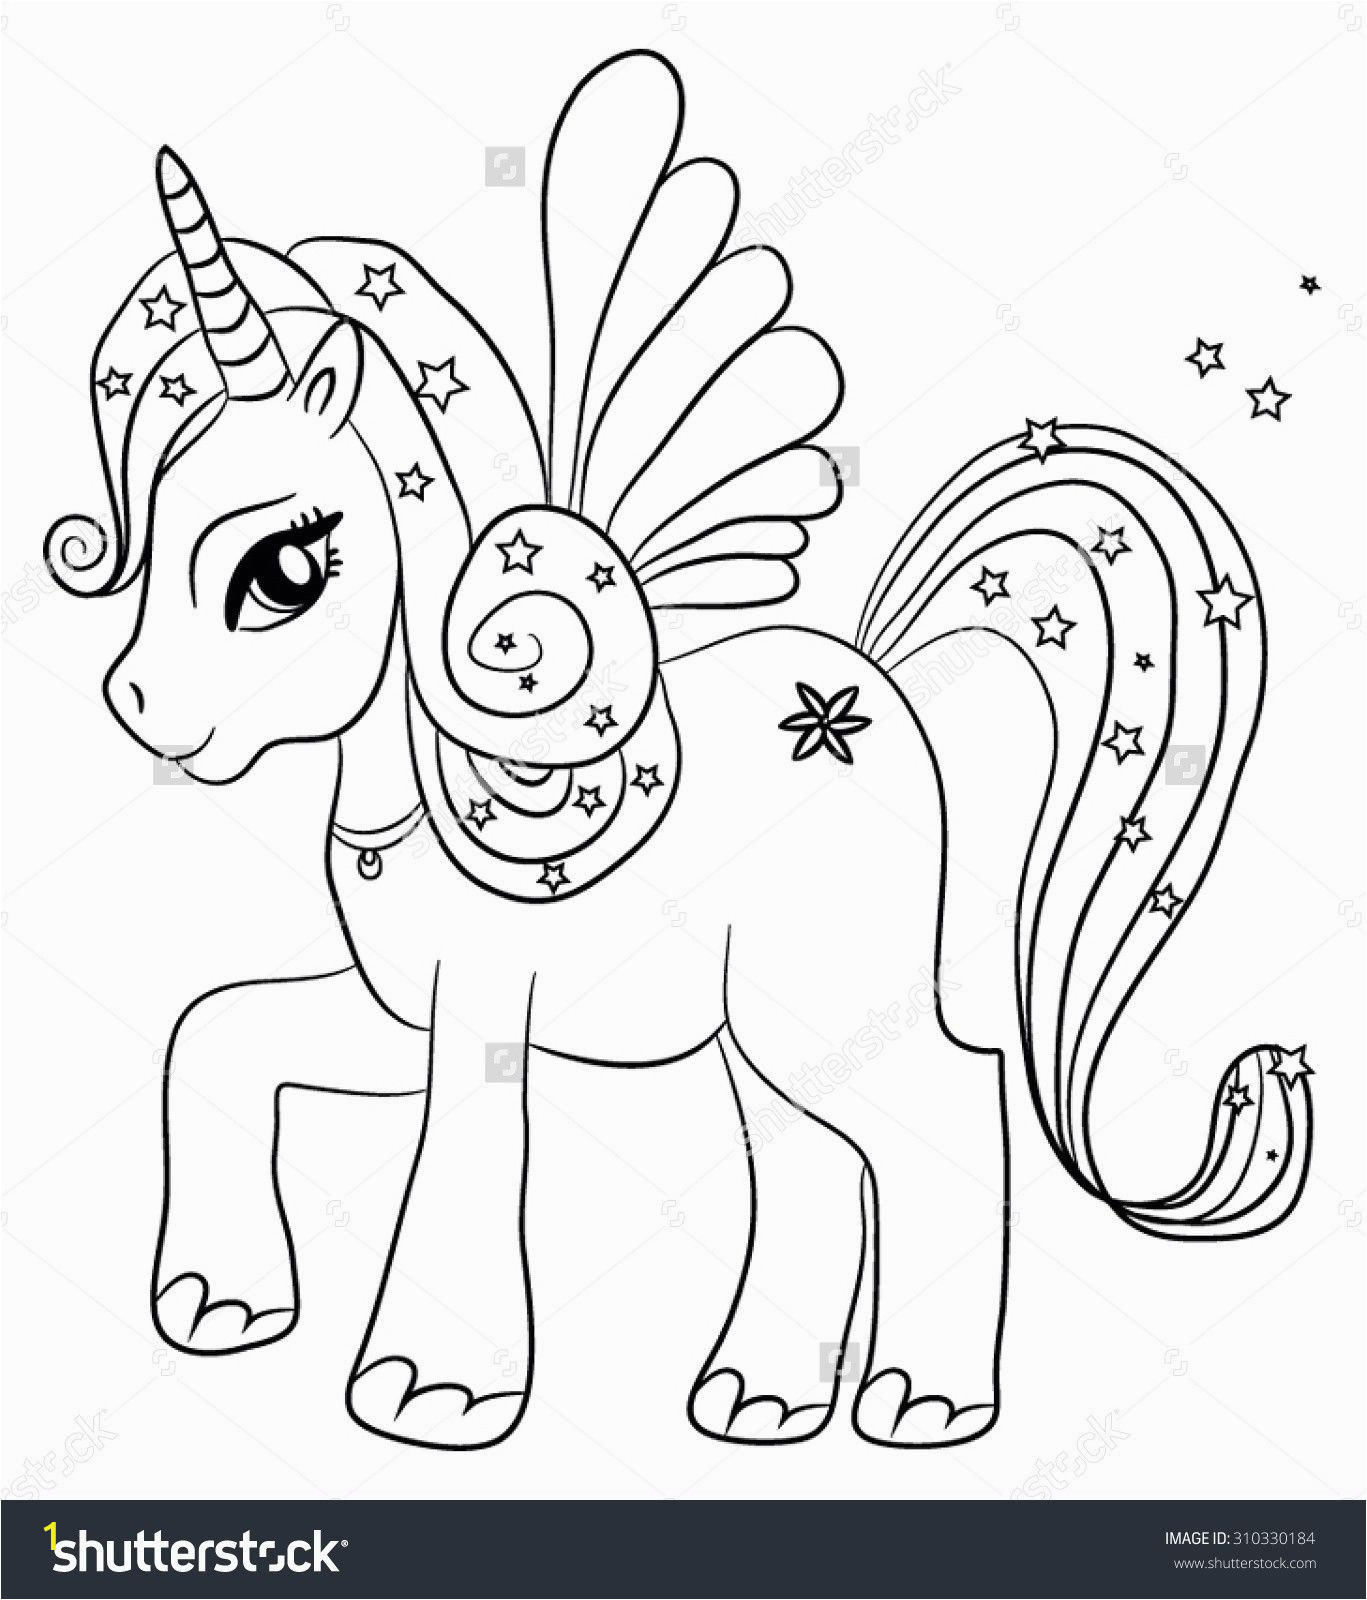 Kawaii Printable Coloring Pages Coloring Pages Unicorns Print Saferbrowser Image Search